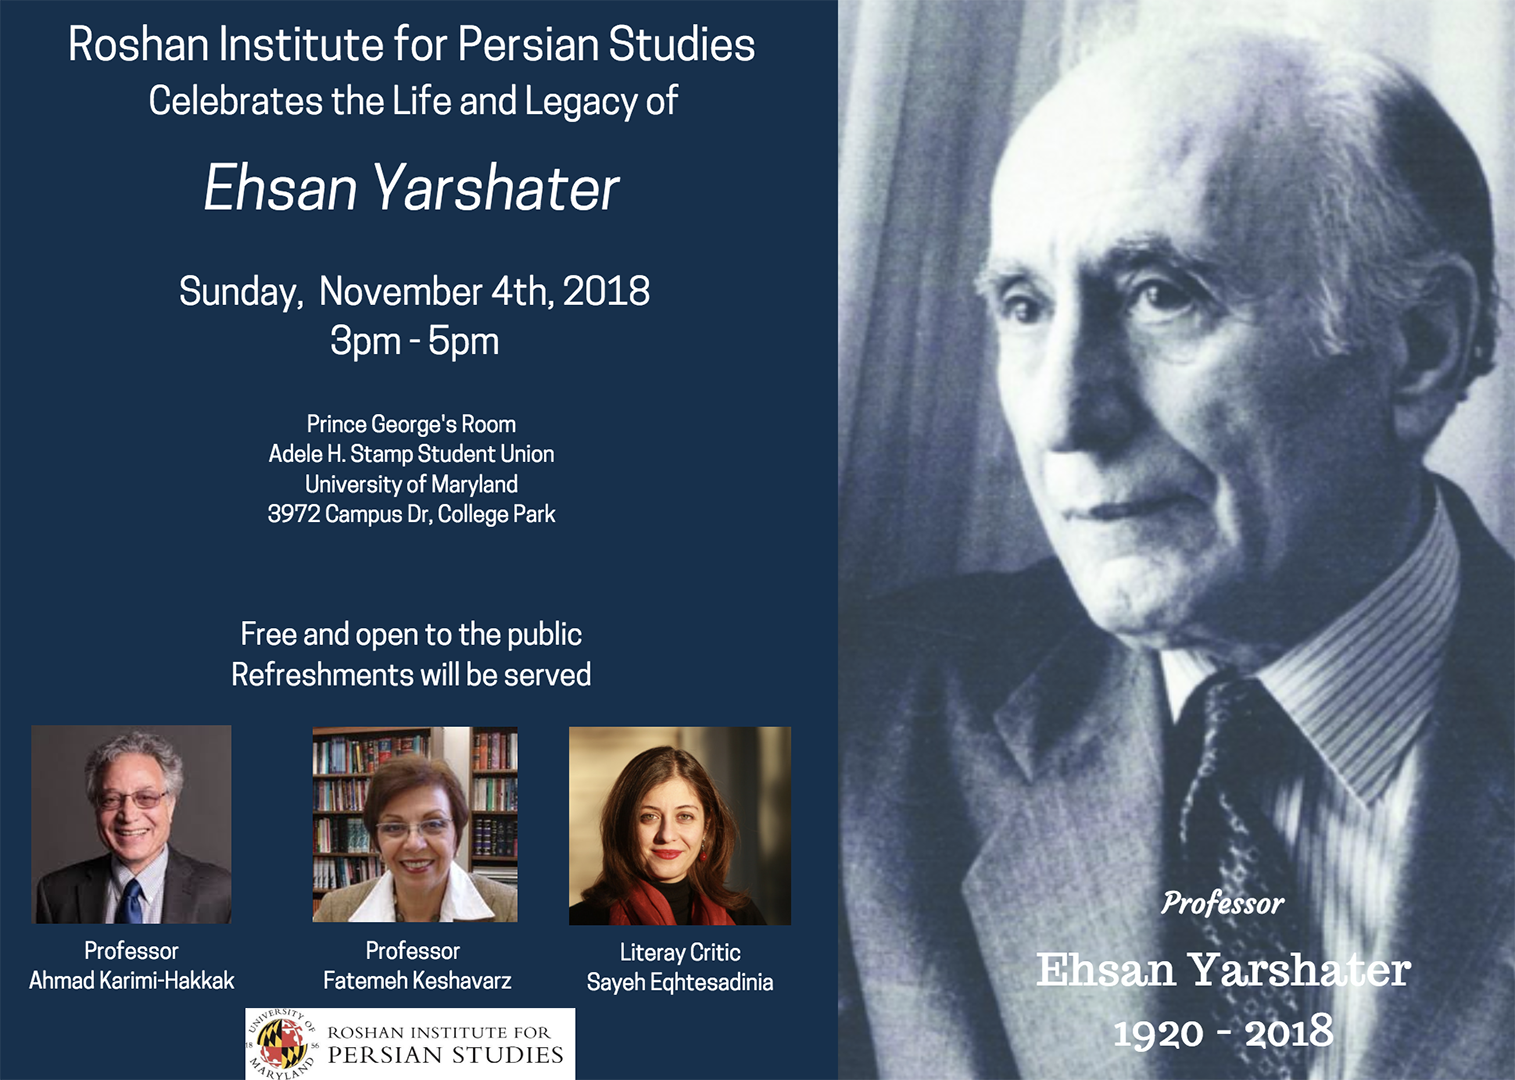 Celebrating the Life and Legacy of Ehsan Yarshater